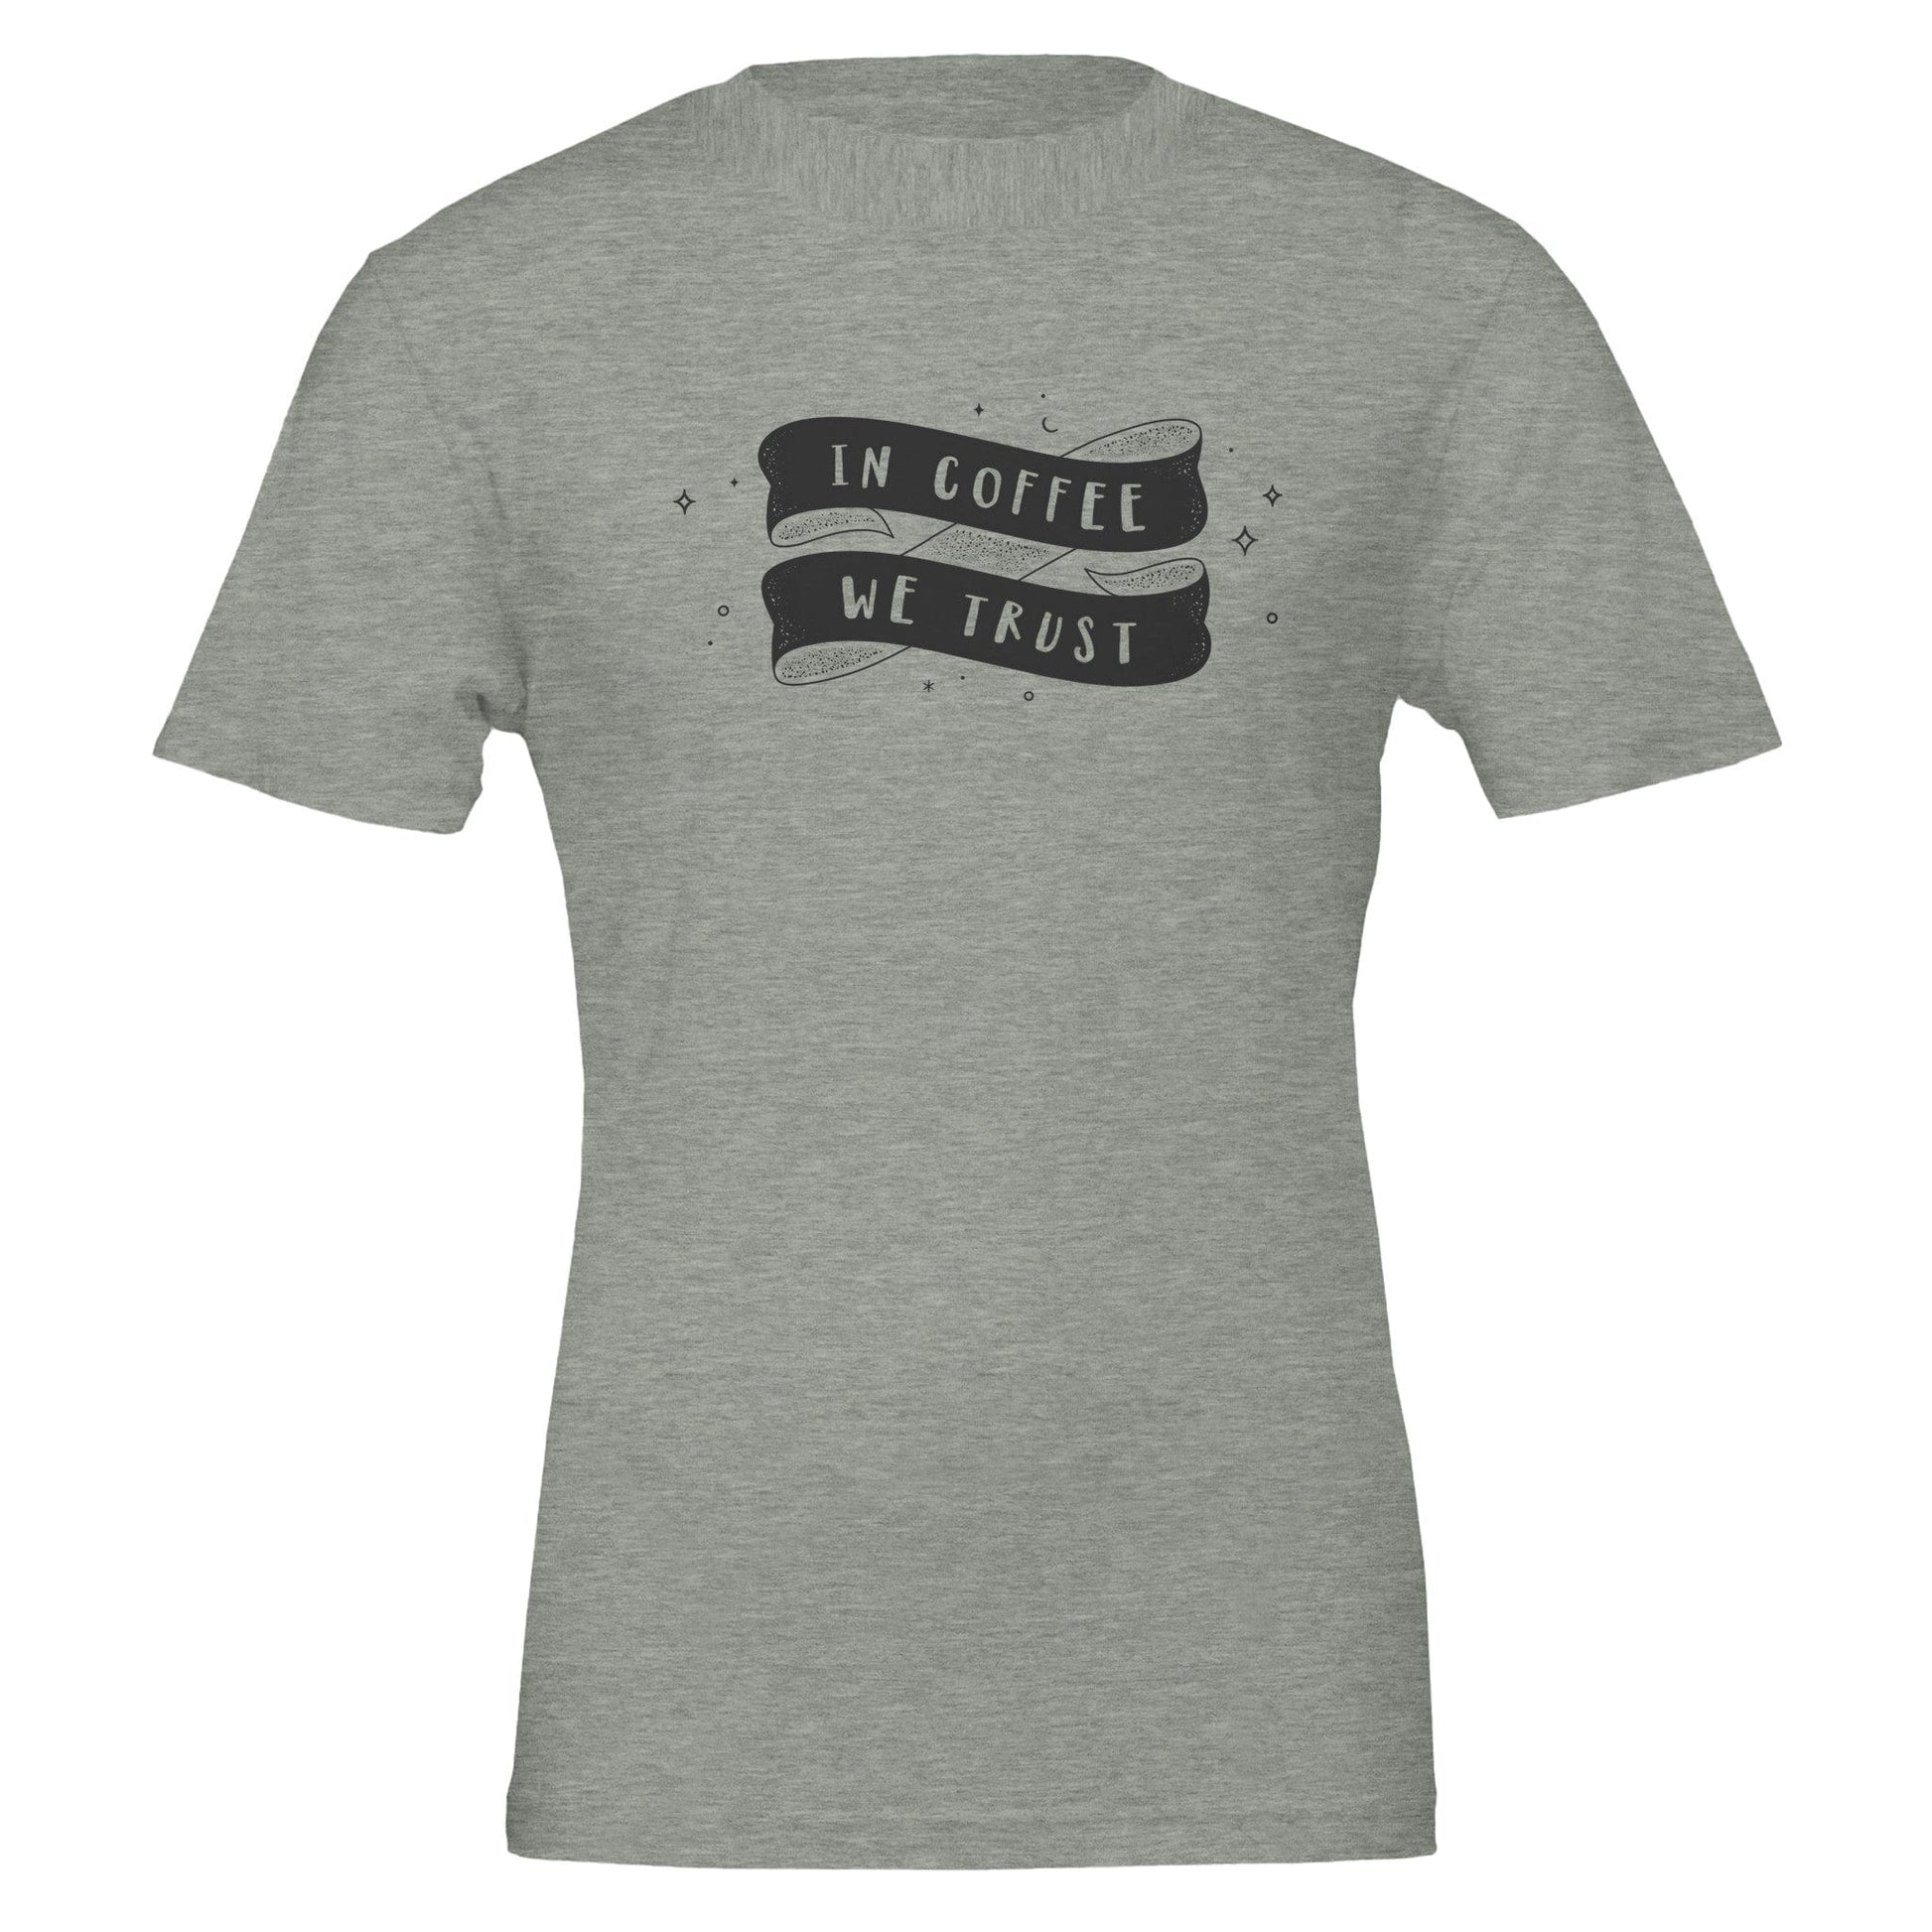 Good Bean Gifts "In Coffee We Trust" Unisex Crewneck T-shirt | Bella + Canvas 3001 Athletic Heather / S